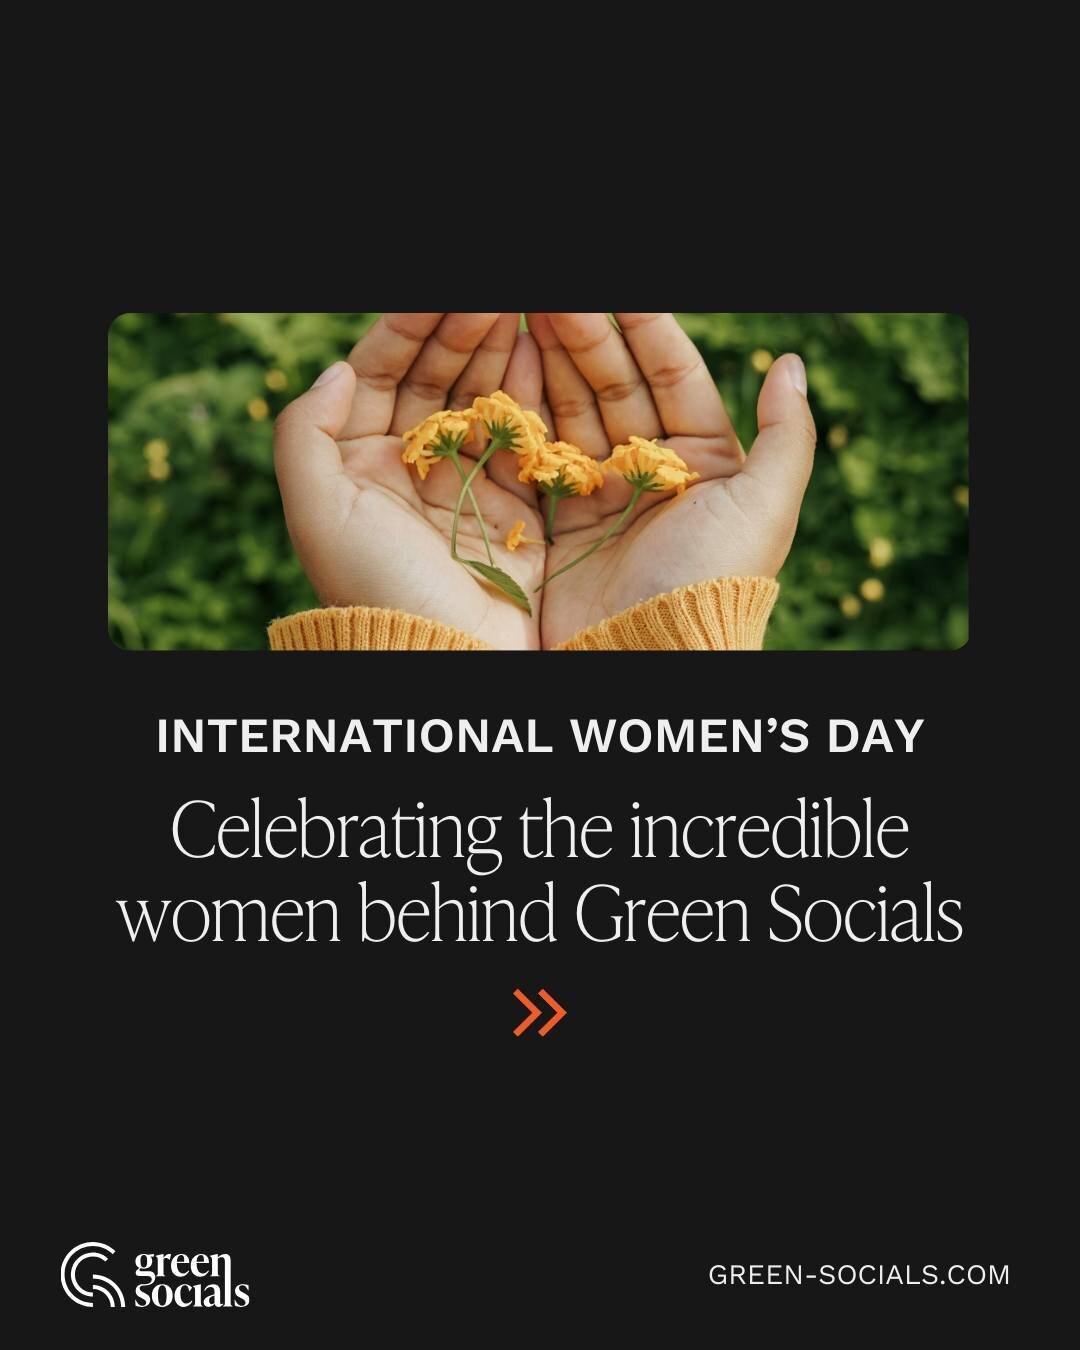 Today we're celebrating International Women's Day, and we want to give a big shout out to the fantastic women who make Green Socials what it is:

💜 Leah. She's been with us since day one back in October 2021. She's worn a lot of hats over the years 